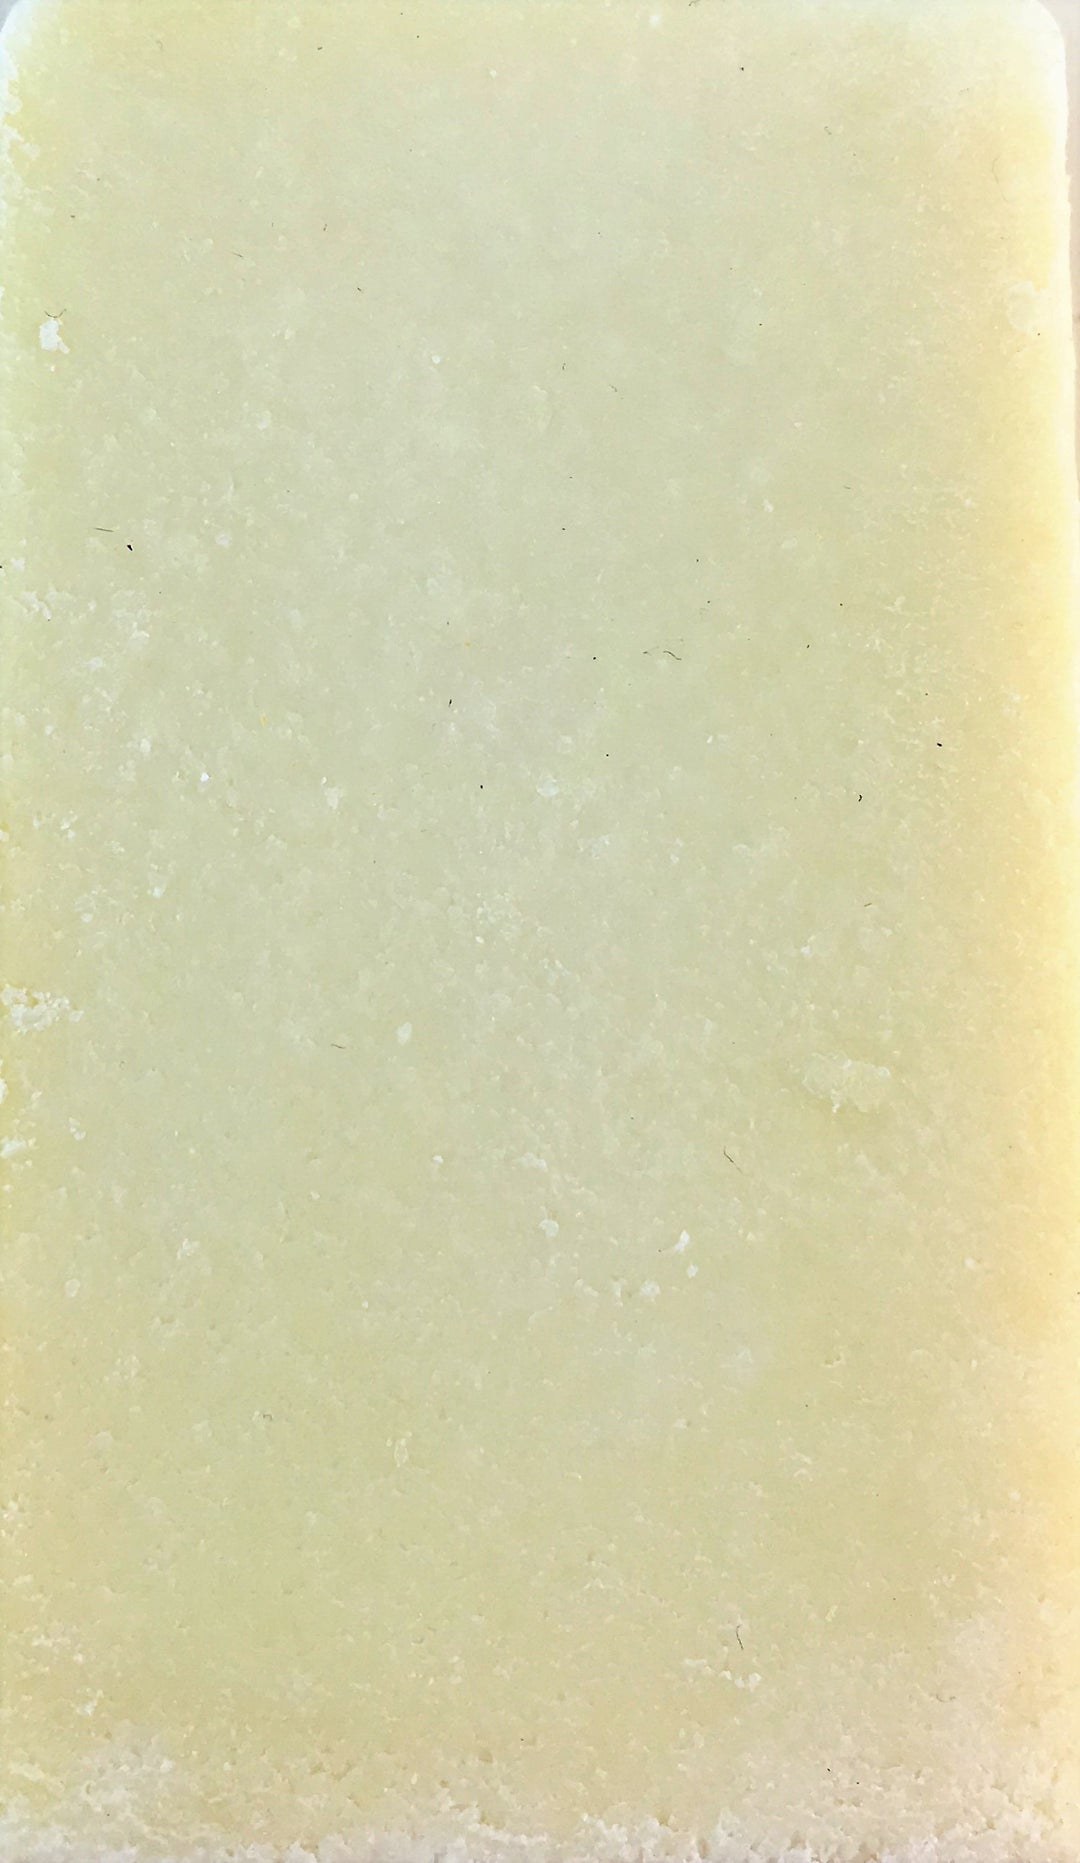 Castile Soap Bar (Fragrance Free) from Handmade Naturals-not included in the 5 Soap Deal